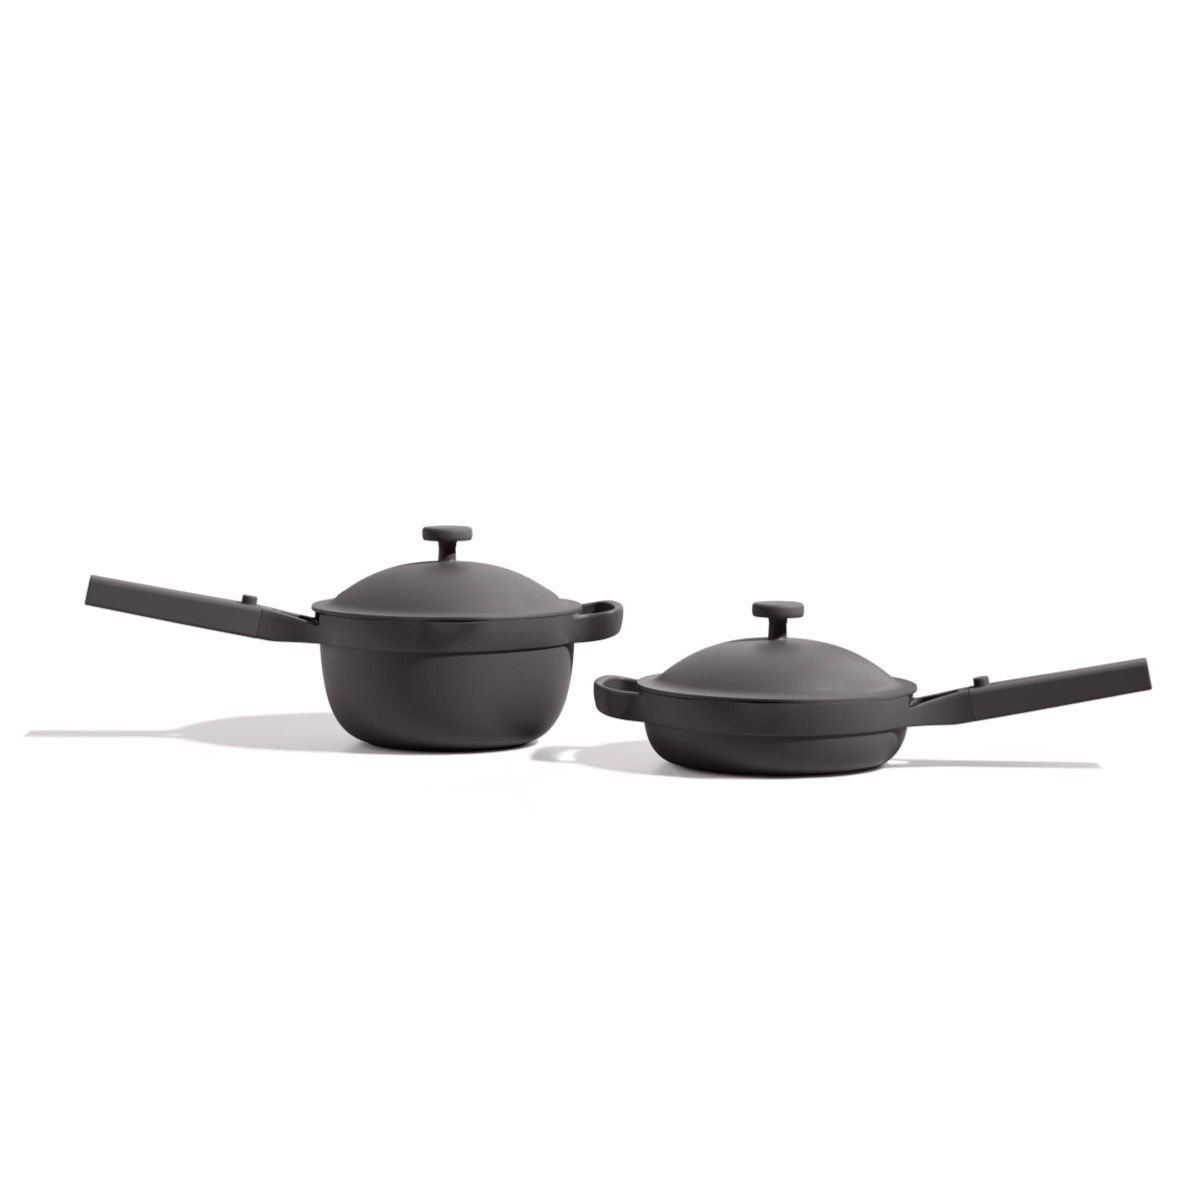 Our Place 8.5" Ceramic Nonstick Home Cook Duo Set 2.0 | Target